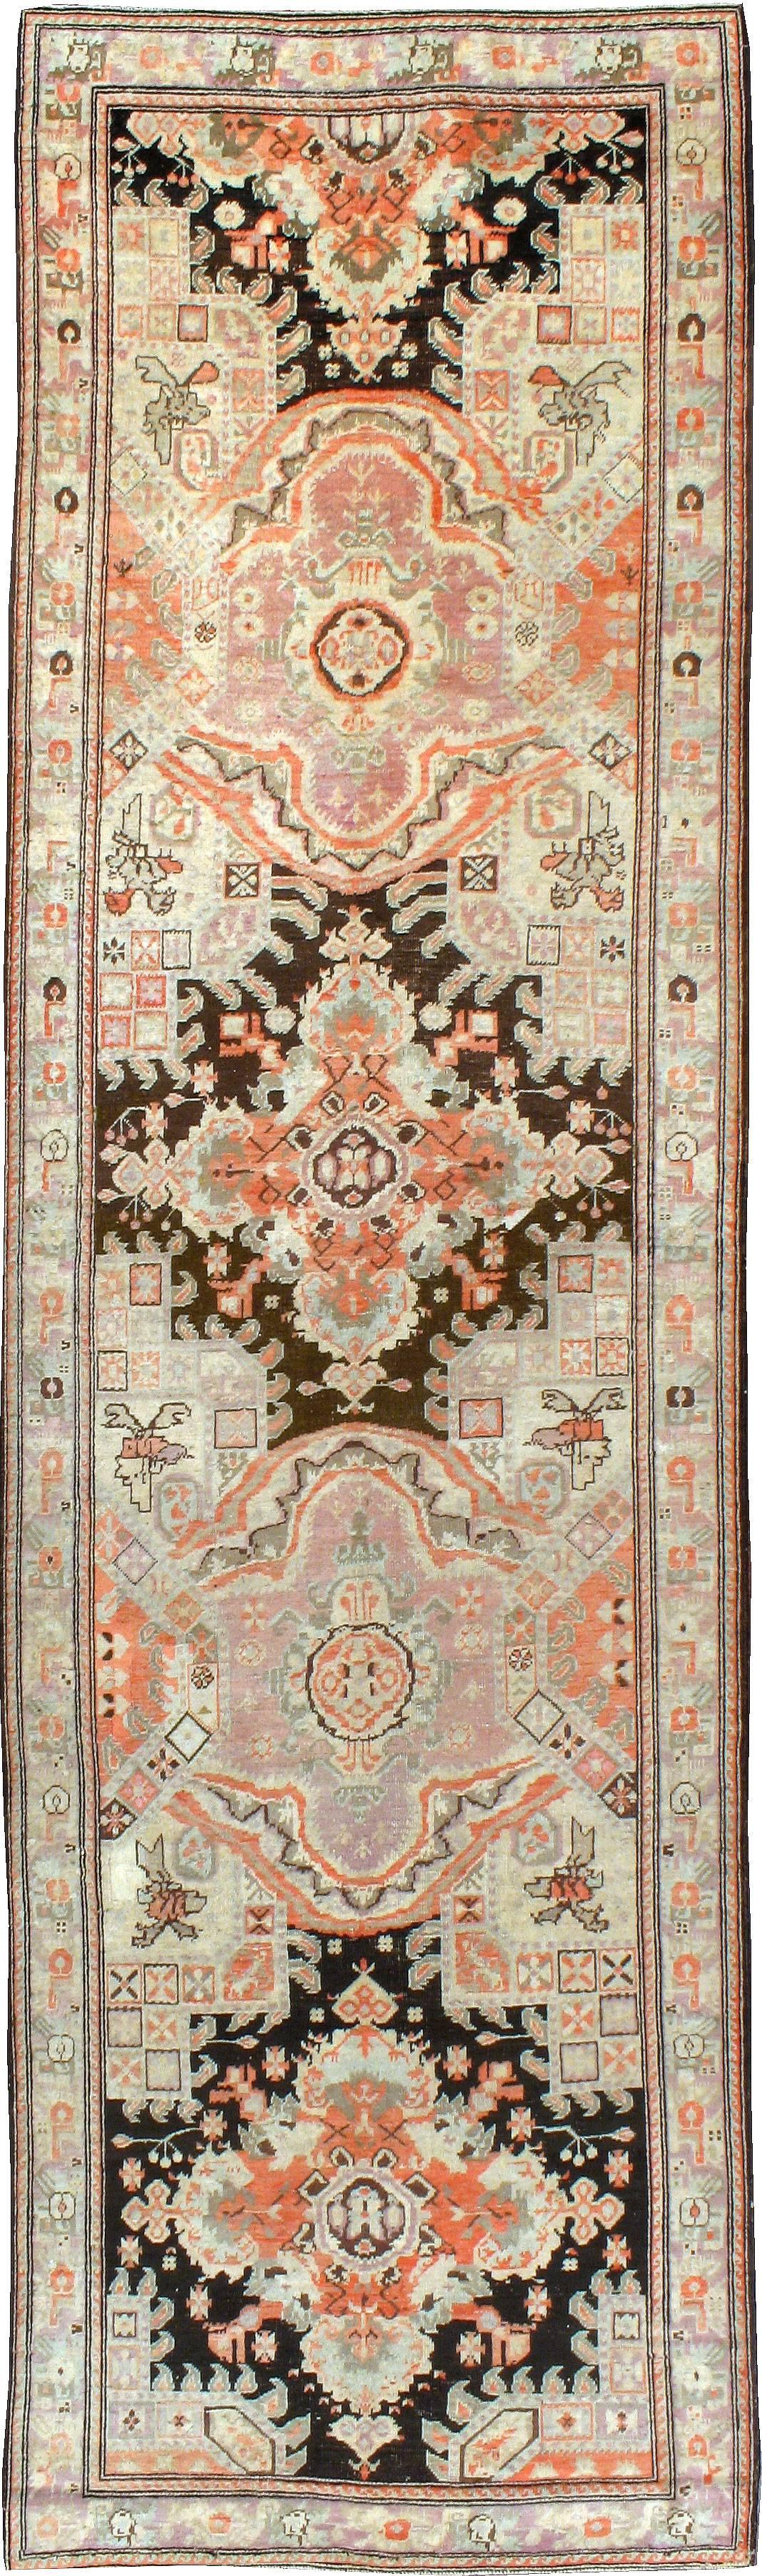 An antique Russian Karabagh rug from the first quarter of the 20th century featuring tones of coral, browns and light purple.